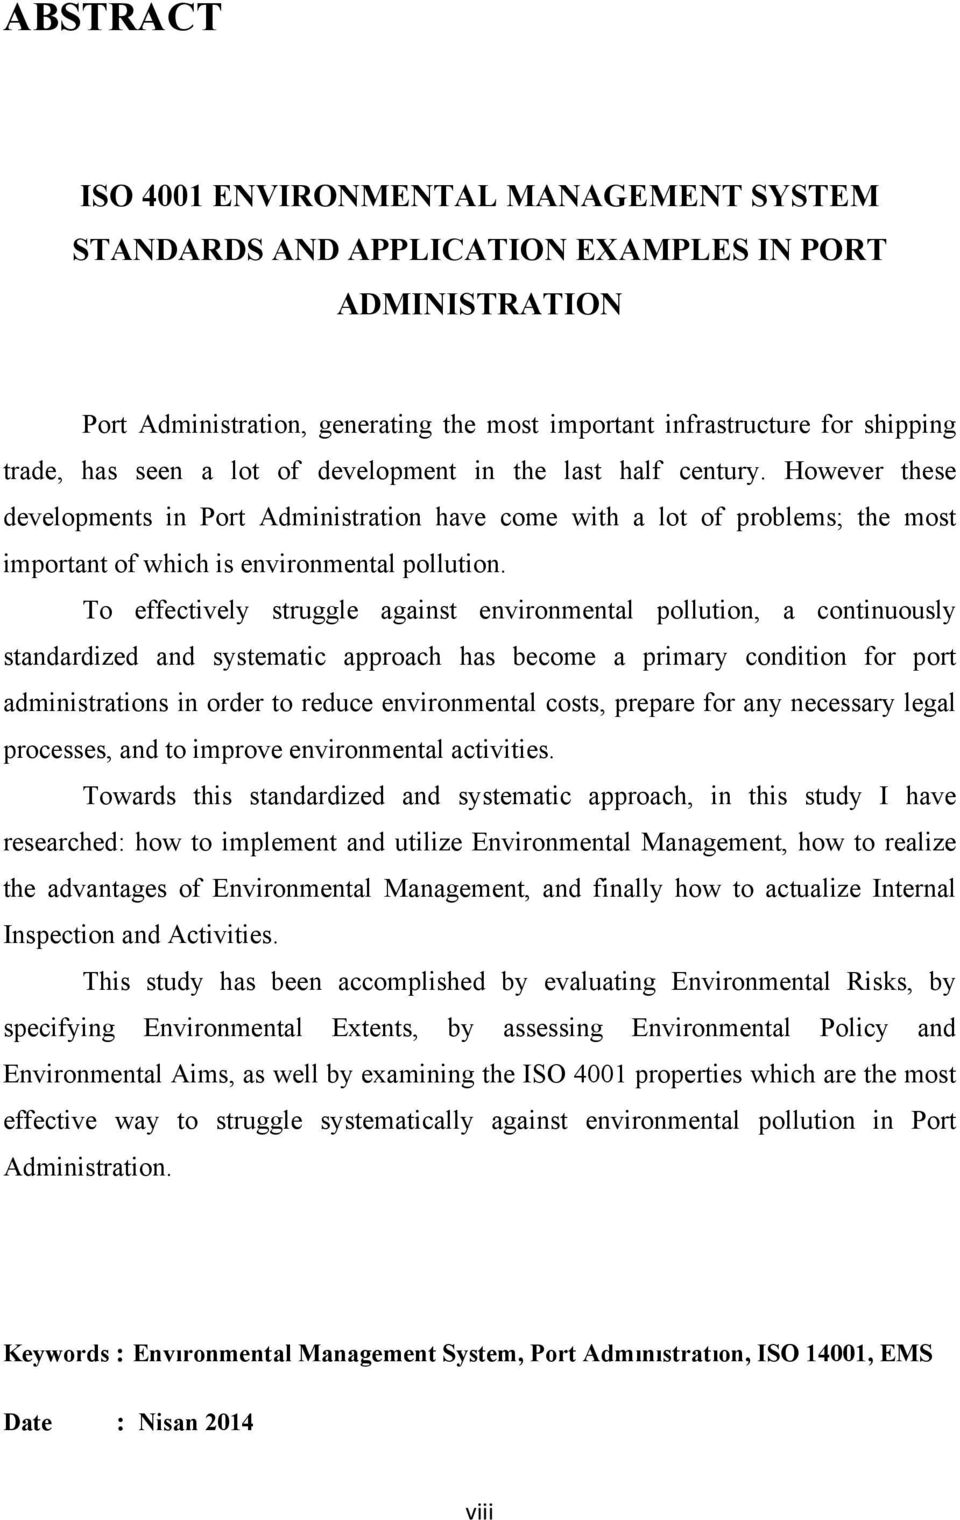 To effectively struggle against environmental pollution, a continuously standardized and systematic approach has become a primary condition for port administrations in order to reduce environmental